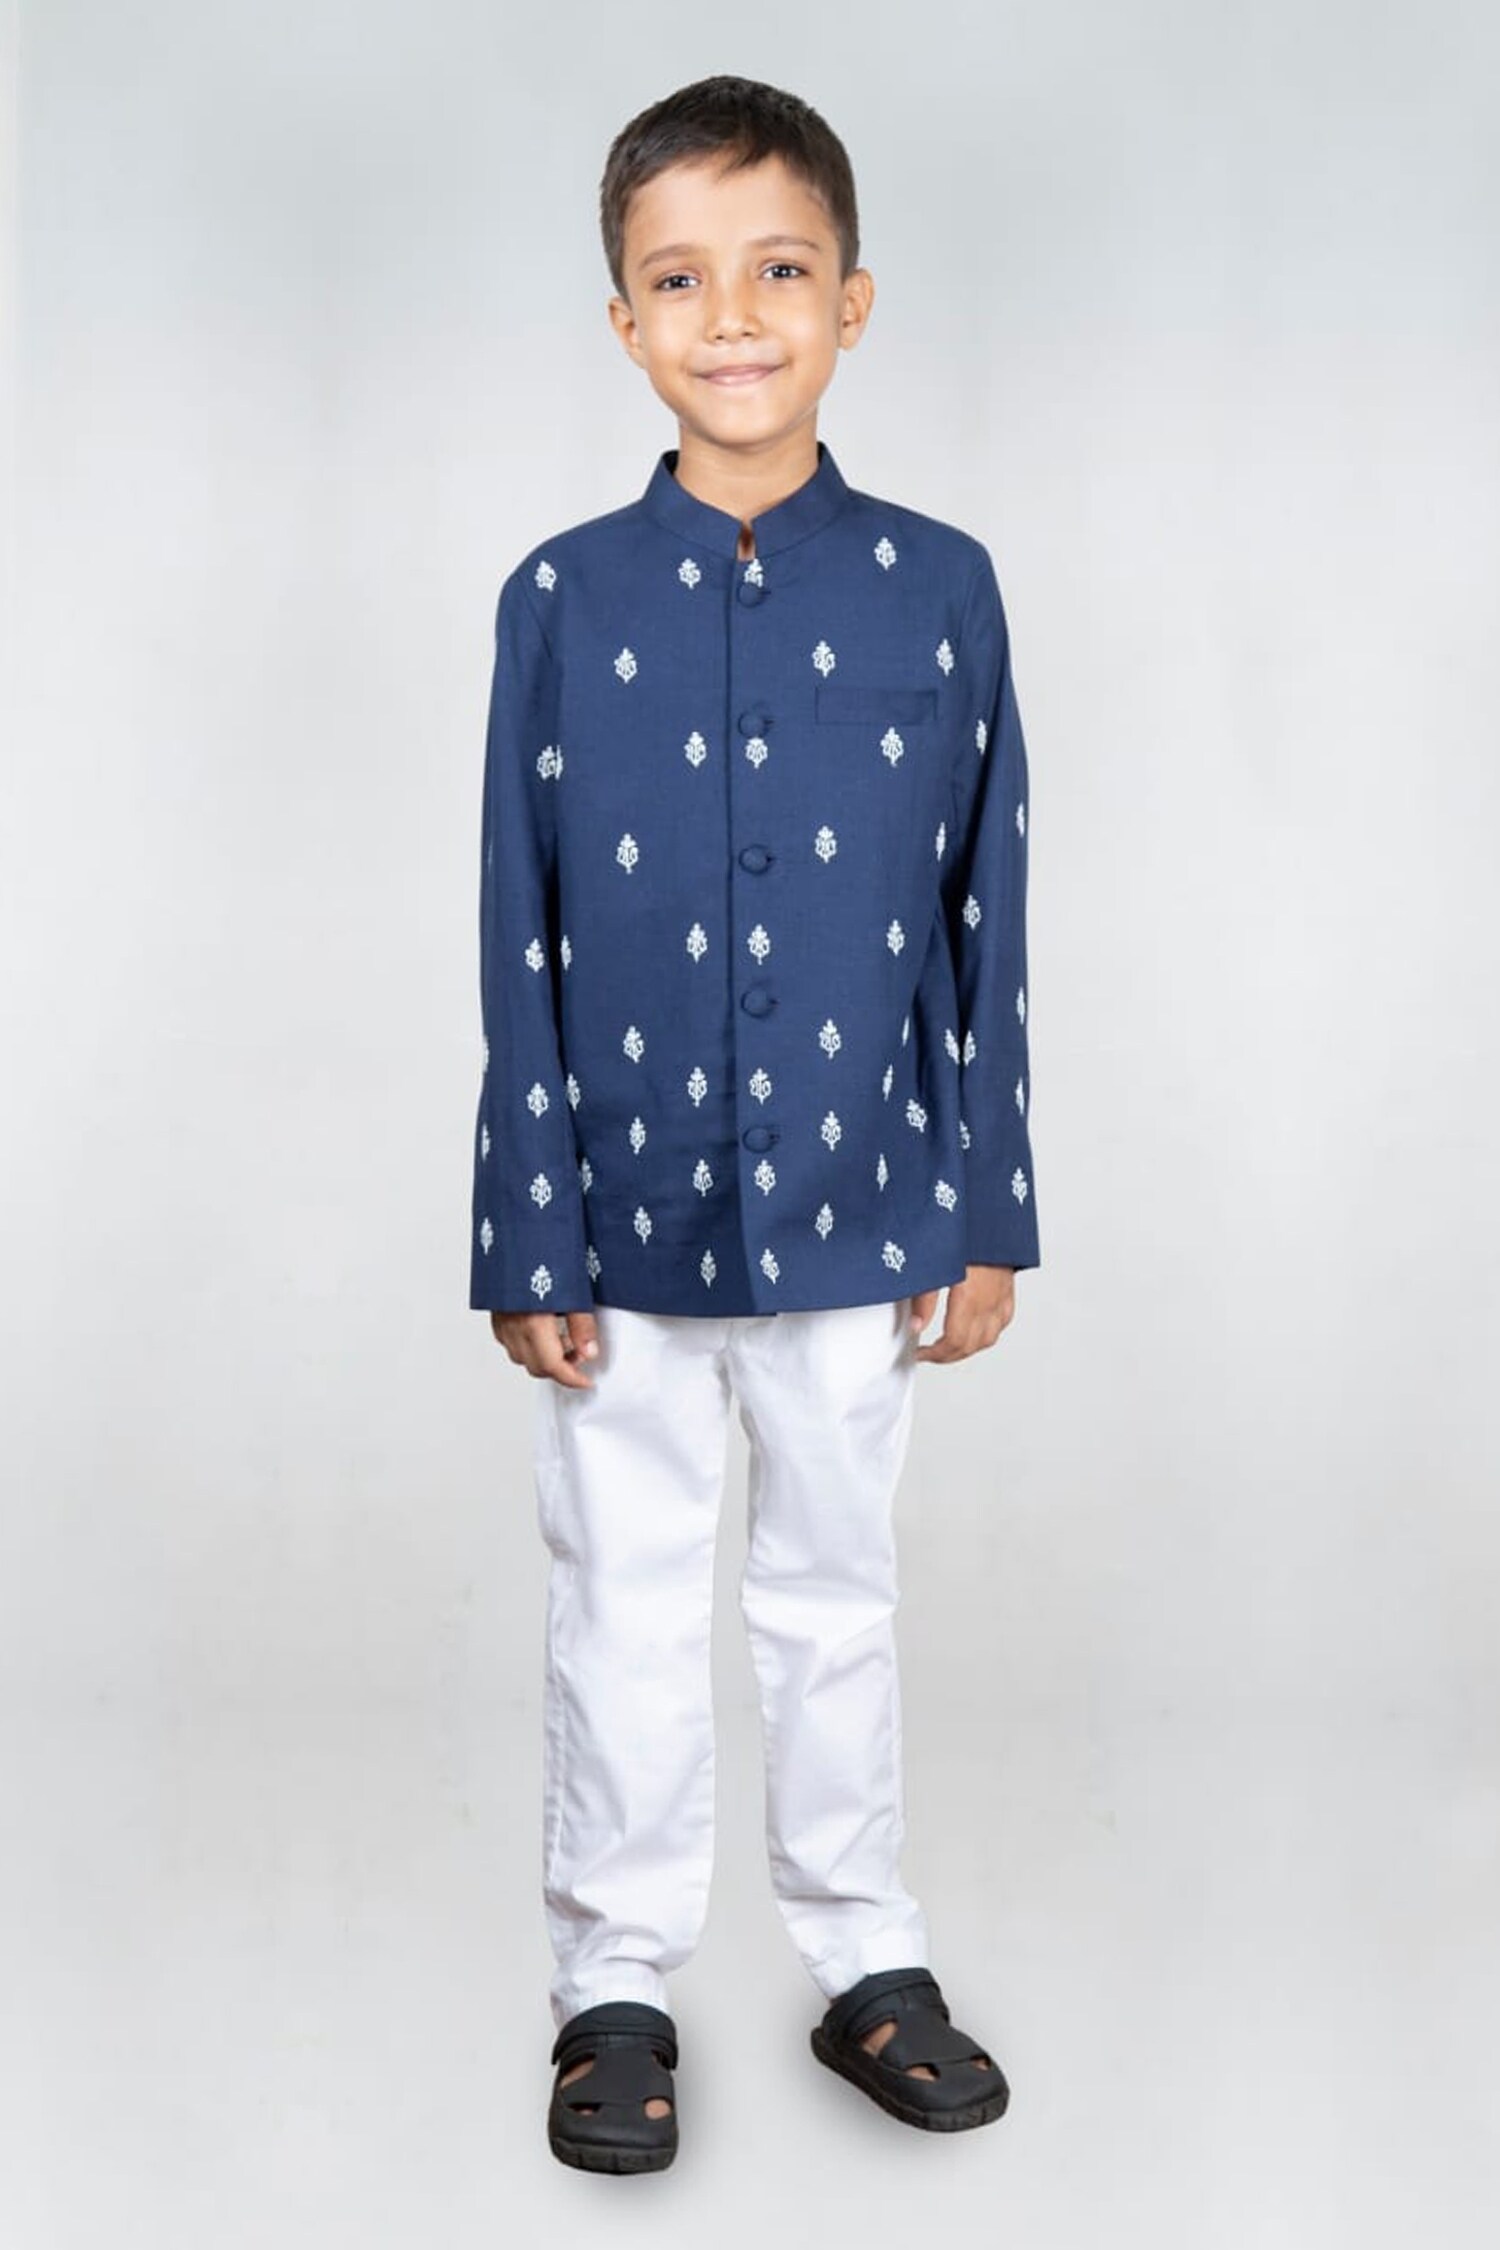 Little Brats Blue Floral Embroidered Jacket And Pant Set For Boys